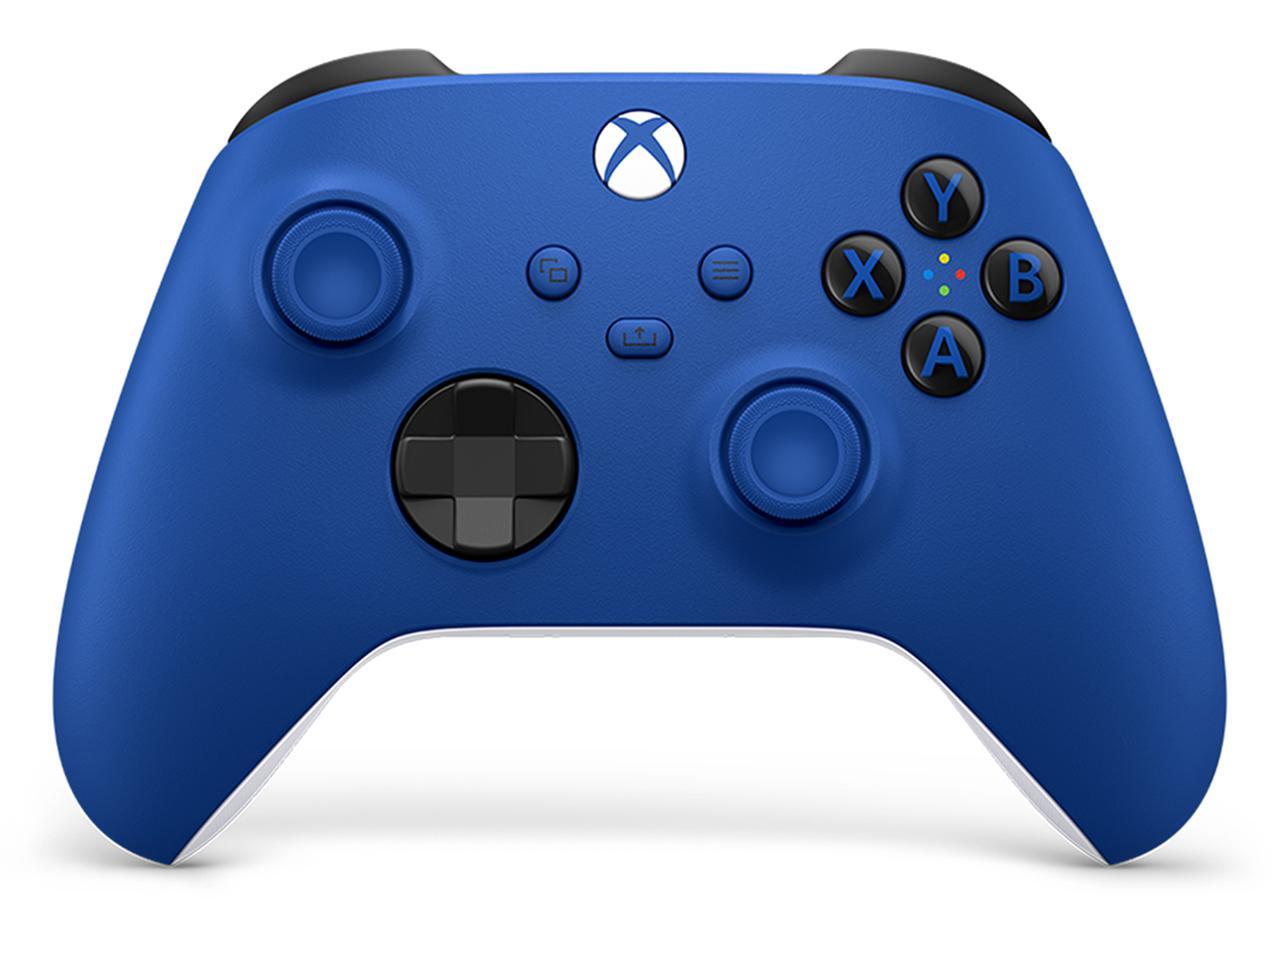 Xbox Wireless Controller - Shock Blue - image 1 of 6